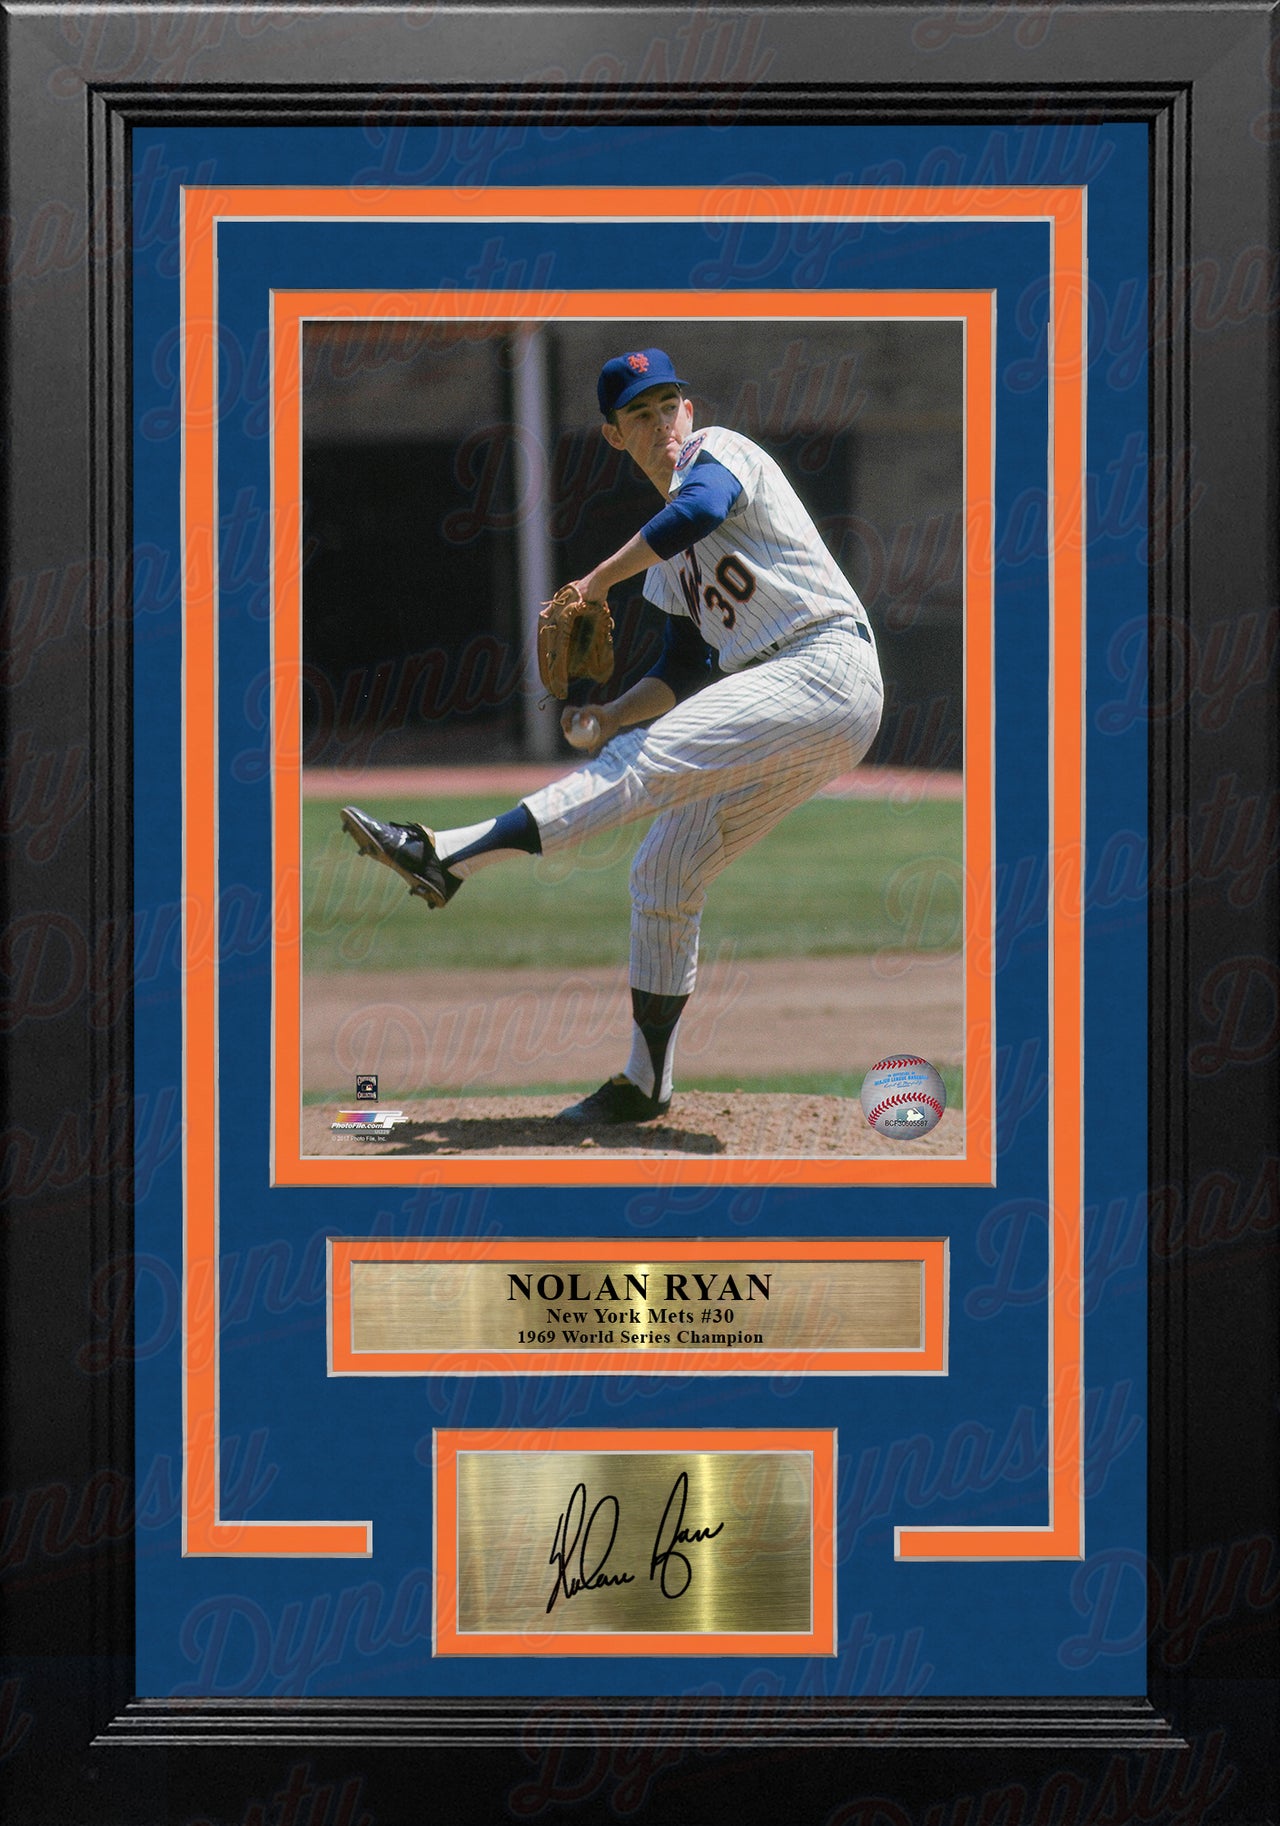 Nolan Ryan in Action New York Mets 8" x 10" Framed Baseball Photo with Engraved Autograph - Dynasty Sports & Framing 